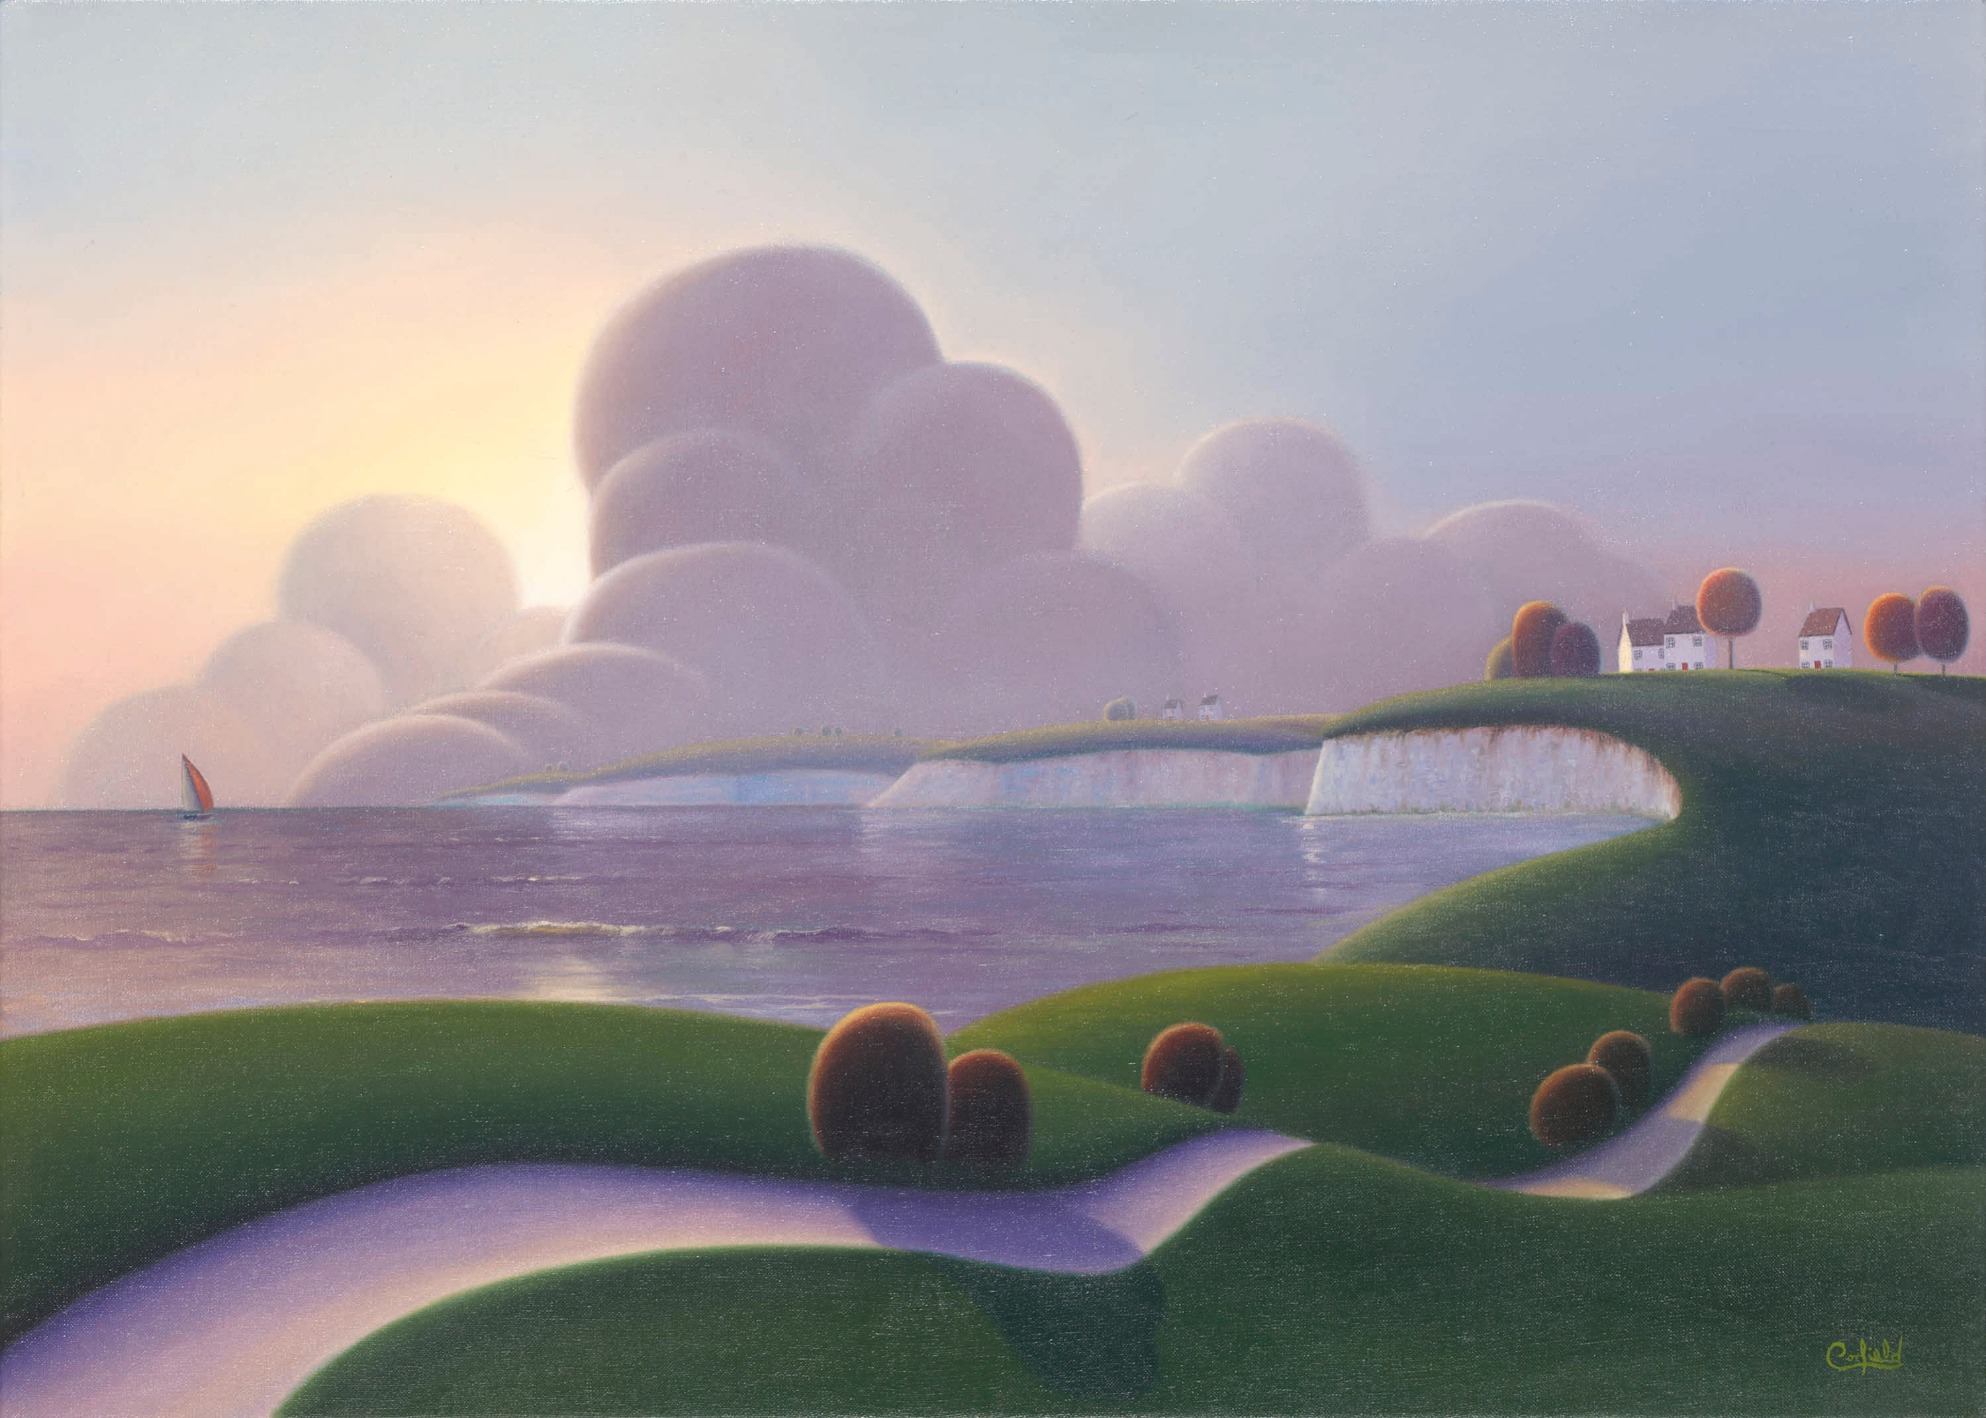 Sailing by by Paul Corfield, Landscape | Naive